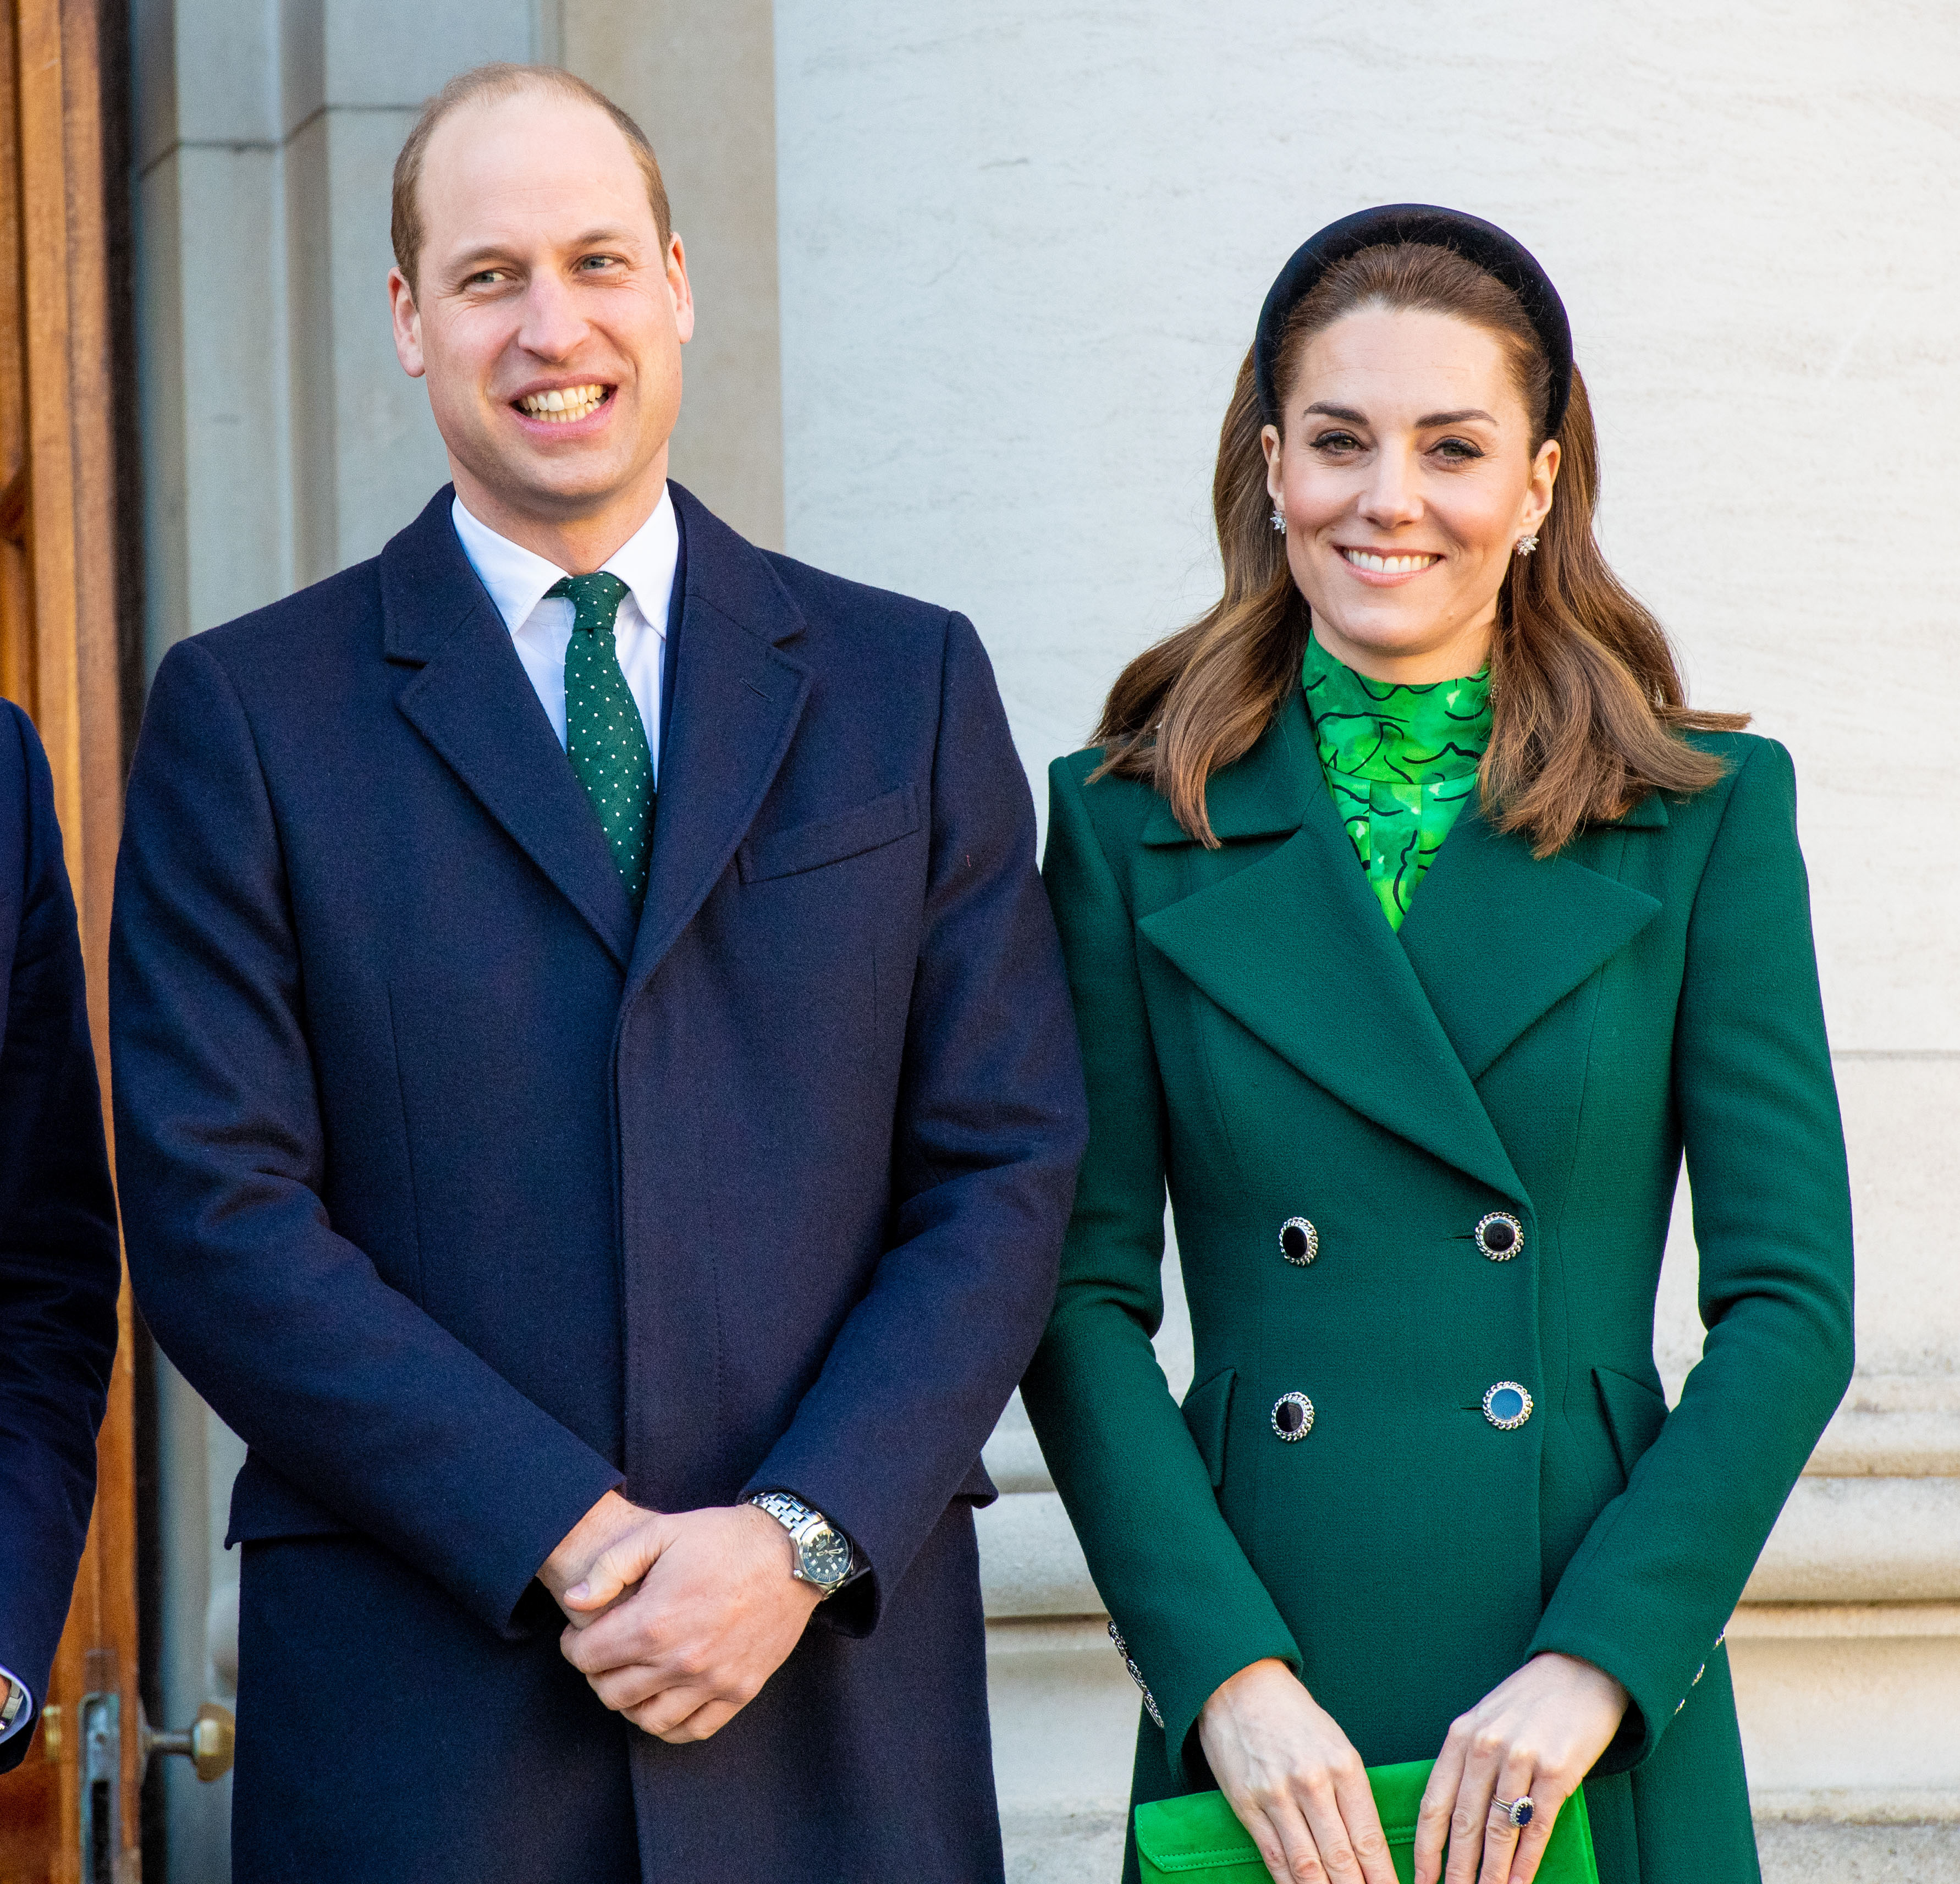 Wills pulled out of an engagement last month after the diagnosis was revealed